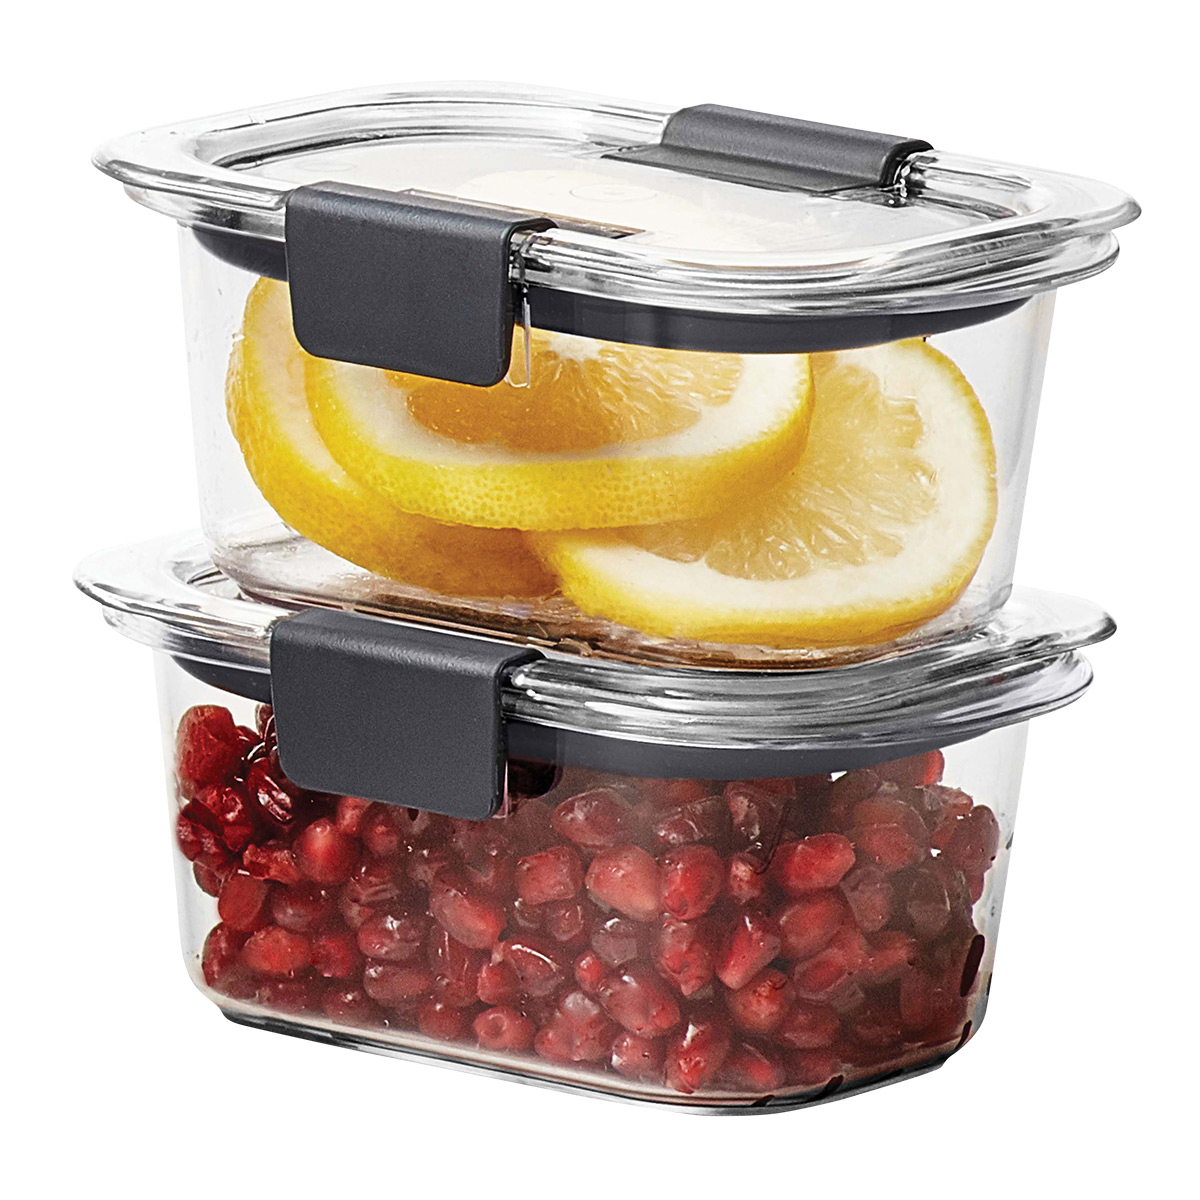 https://www.containerstore.com/catalogimages/498179/10096075-2183416_01-rubbermaid-ven.jpg